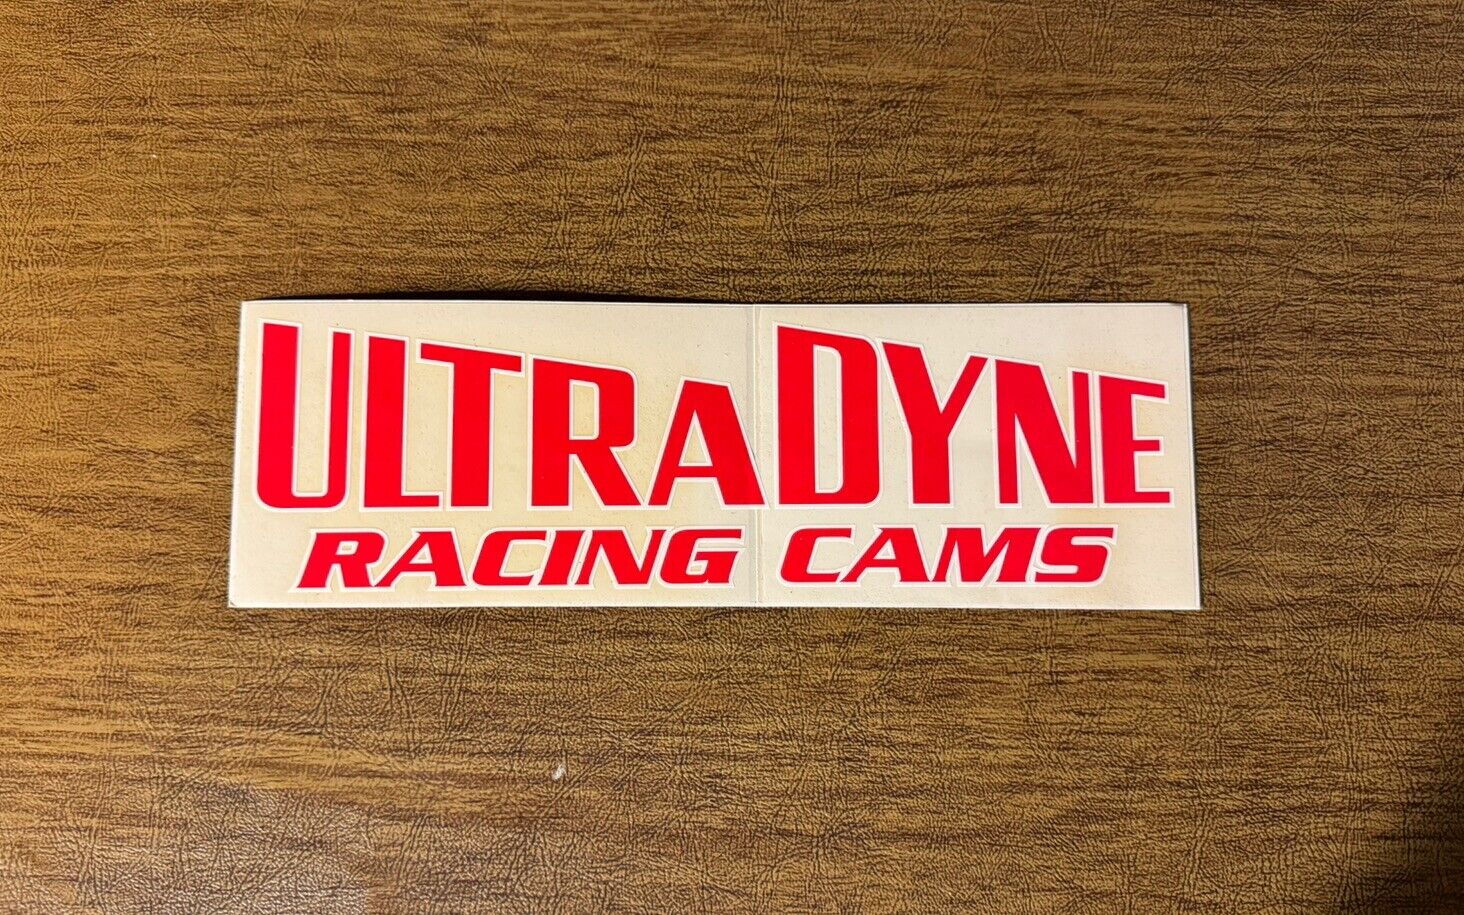 Large 10” x 3” Ultra Dyne Racing Cams Sticker in Mint Condition.